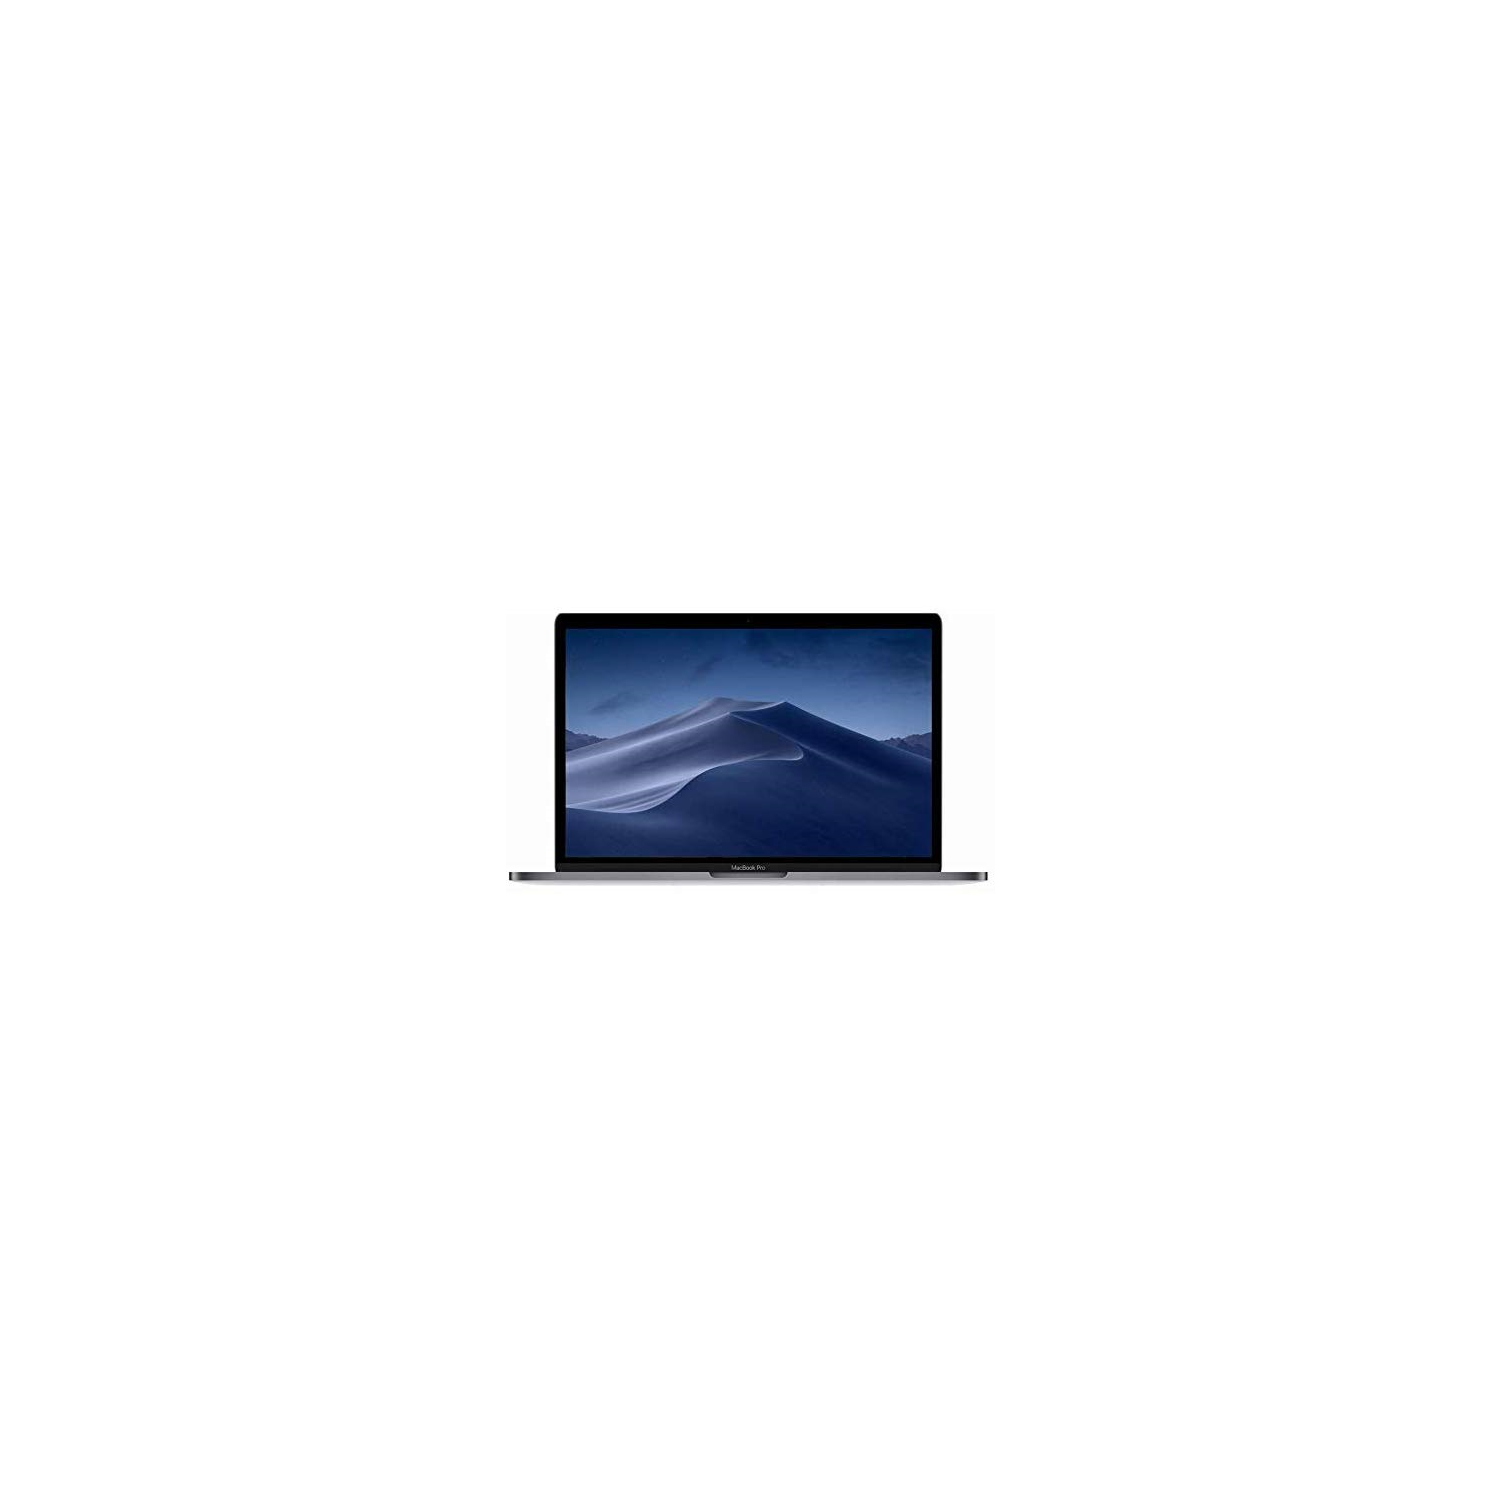 Refurbished (Excellent) - Apple MacBook Pro w/Touch Bar 15.4" - Intel Core i7 2.6 GHz - 16GB RAM - 256GB SSD - US QWERTY Keyboard (Mlh32ll/a Late 2016, Space Gray)